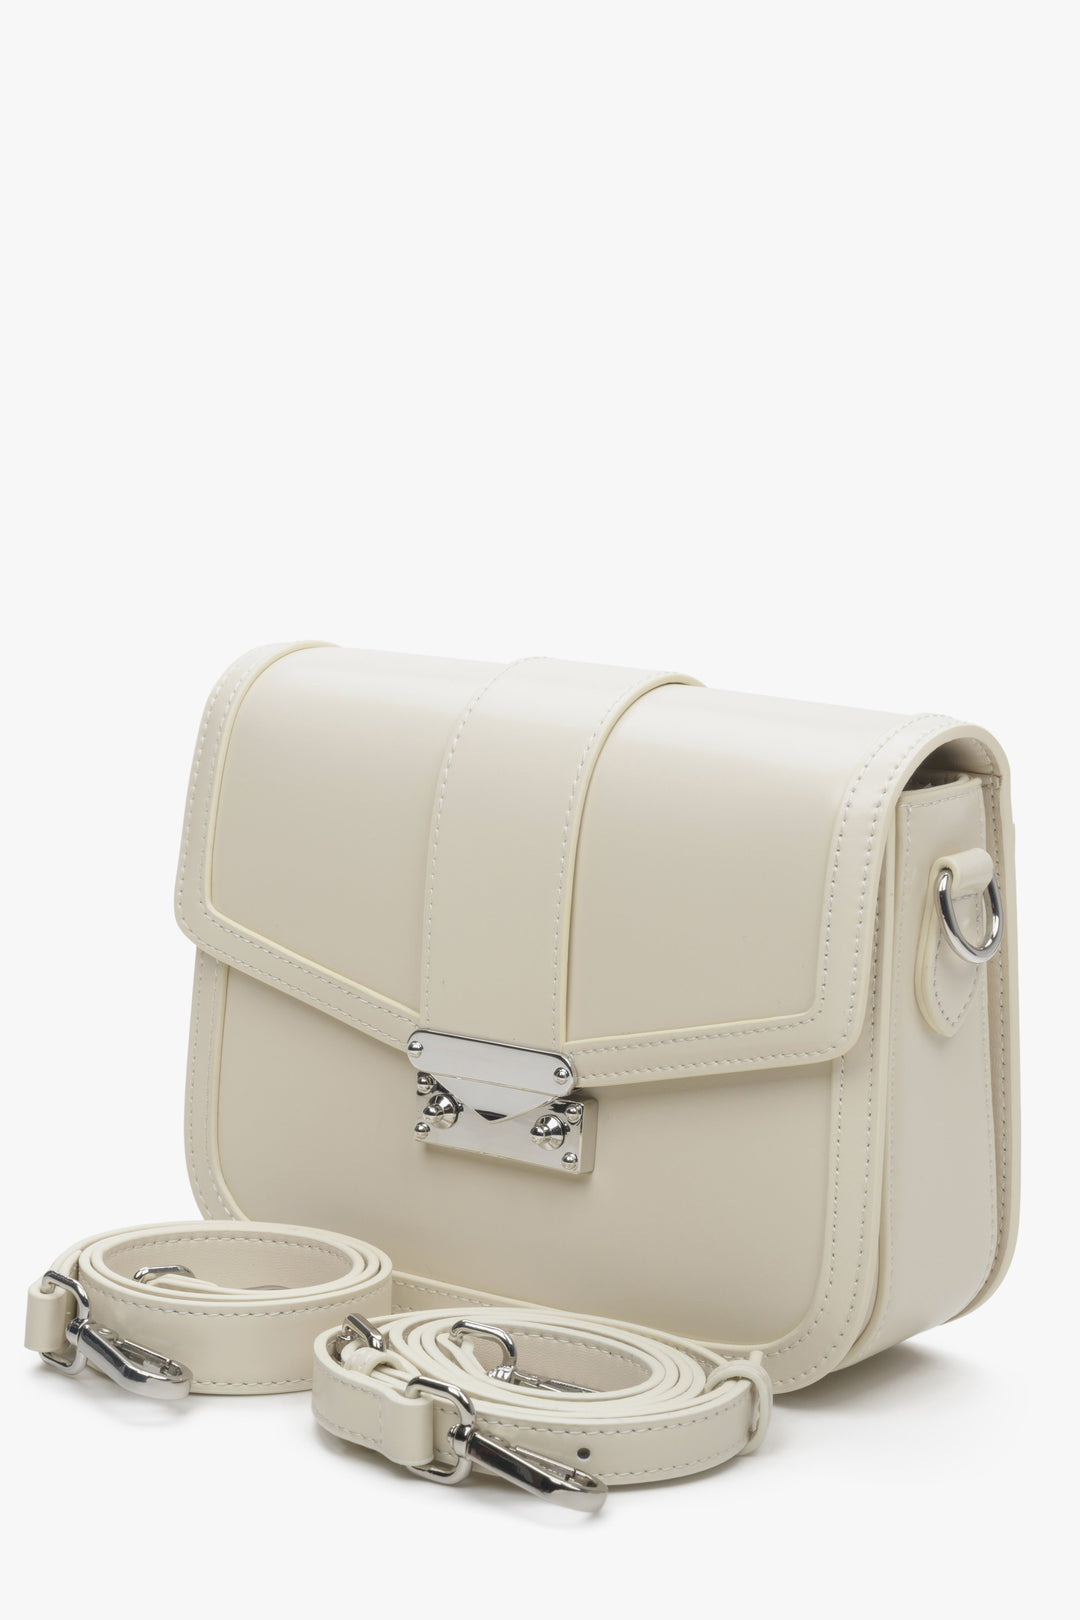 A light beige leather women's bag by Estro with silver fittings.